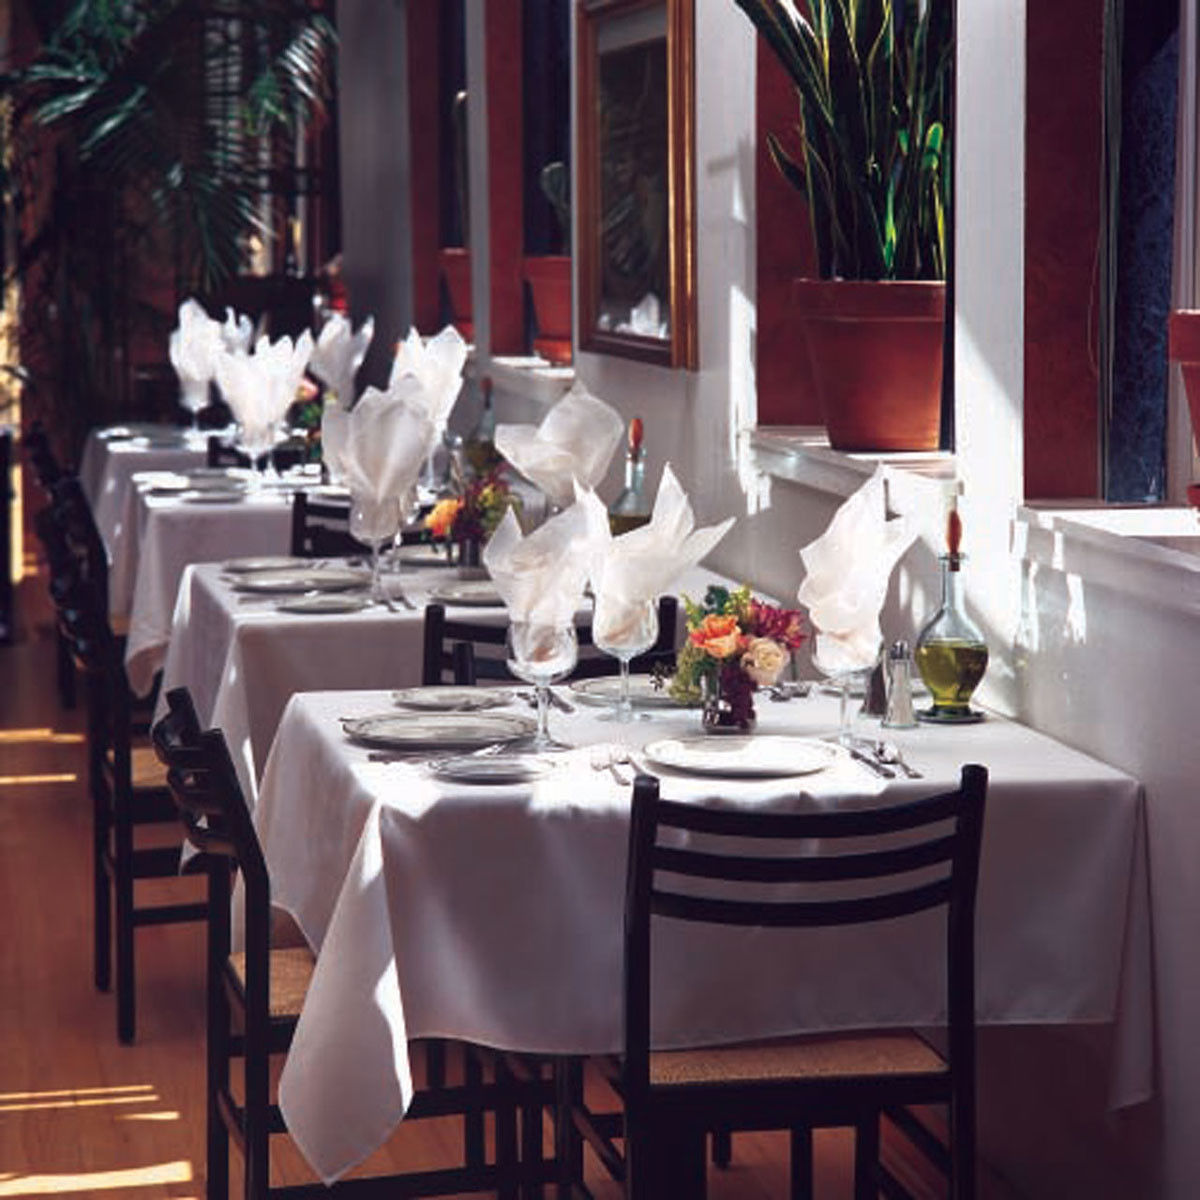 What are the benefits of these Milliken's Signature Plus table linens for restaurant owners?